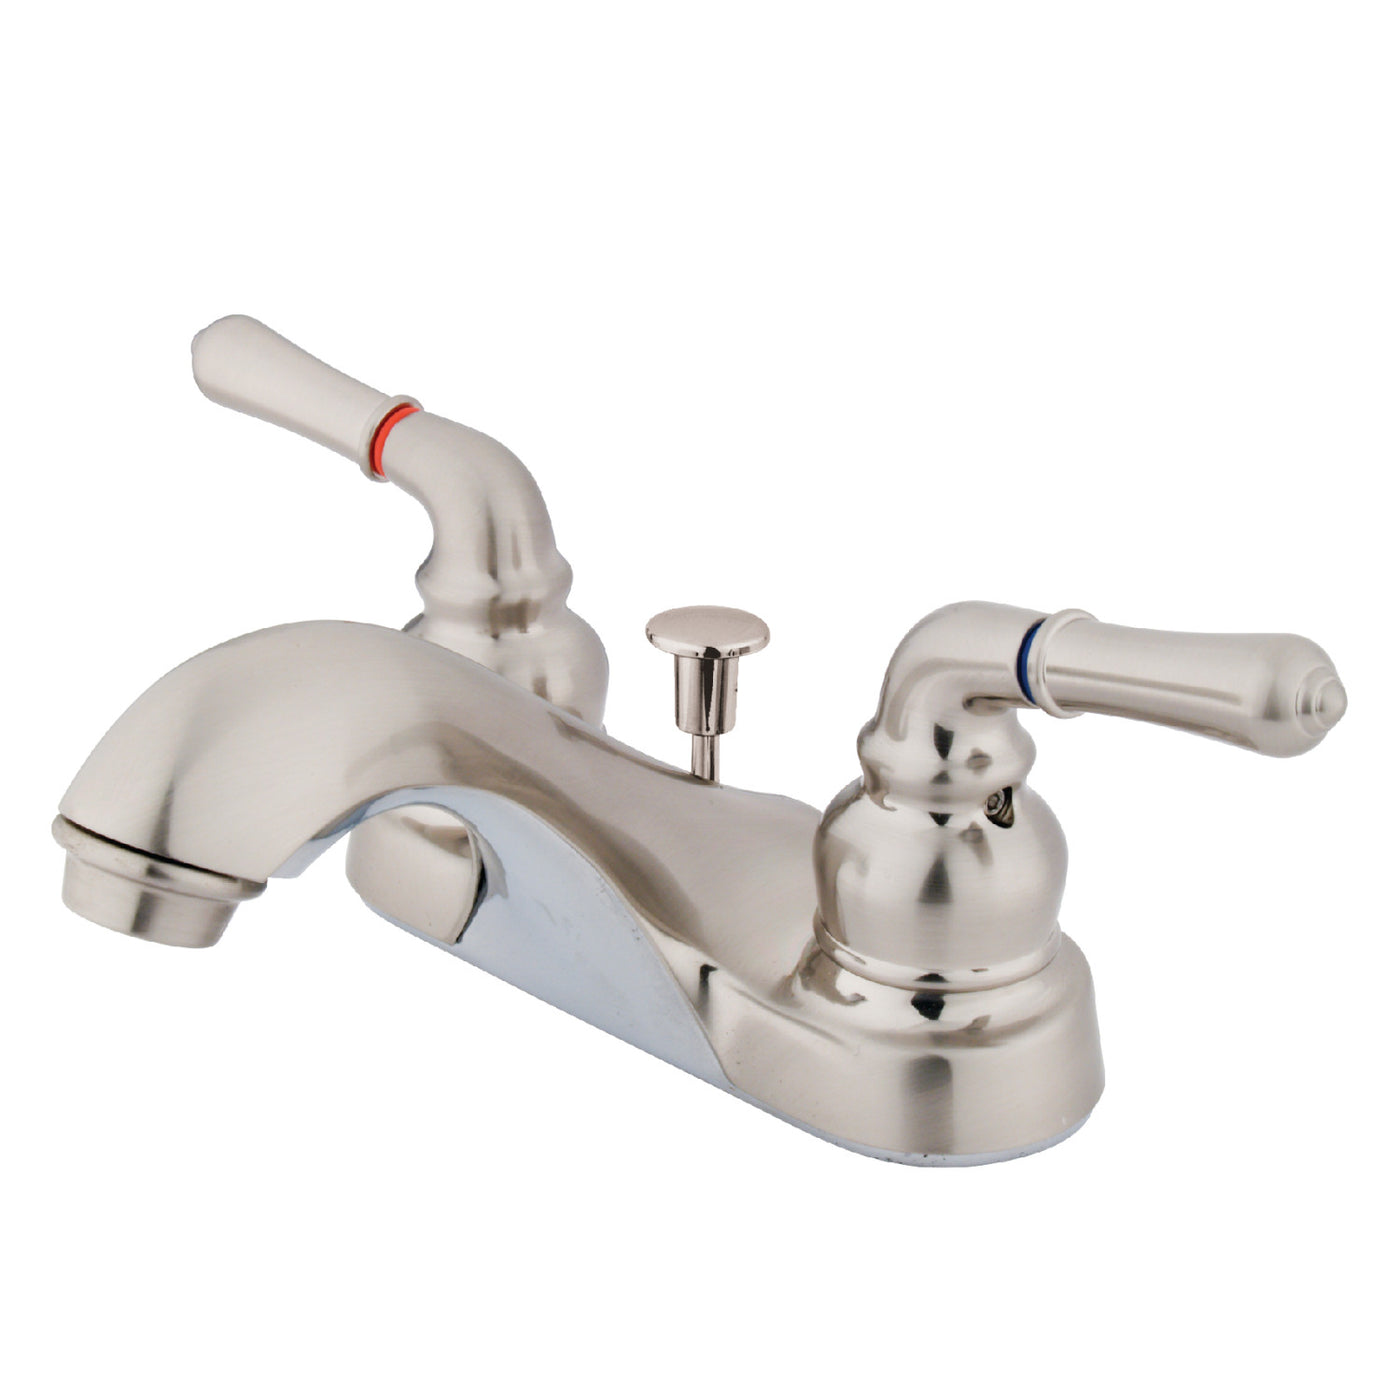 Elements of Design EB0828 4-Inch Centerset Bathroom Faucet, Brushed Nickel